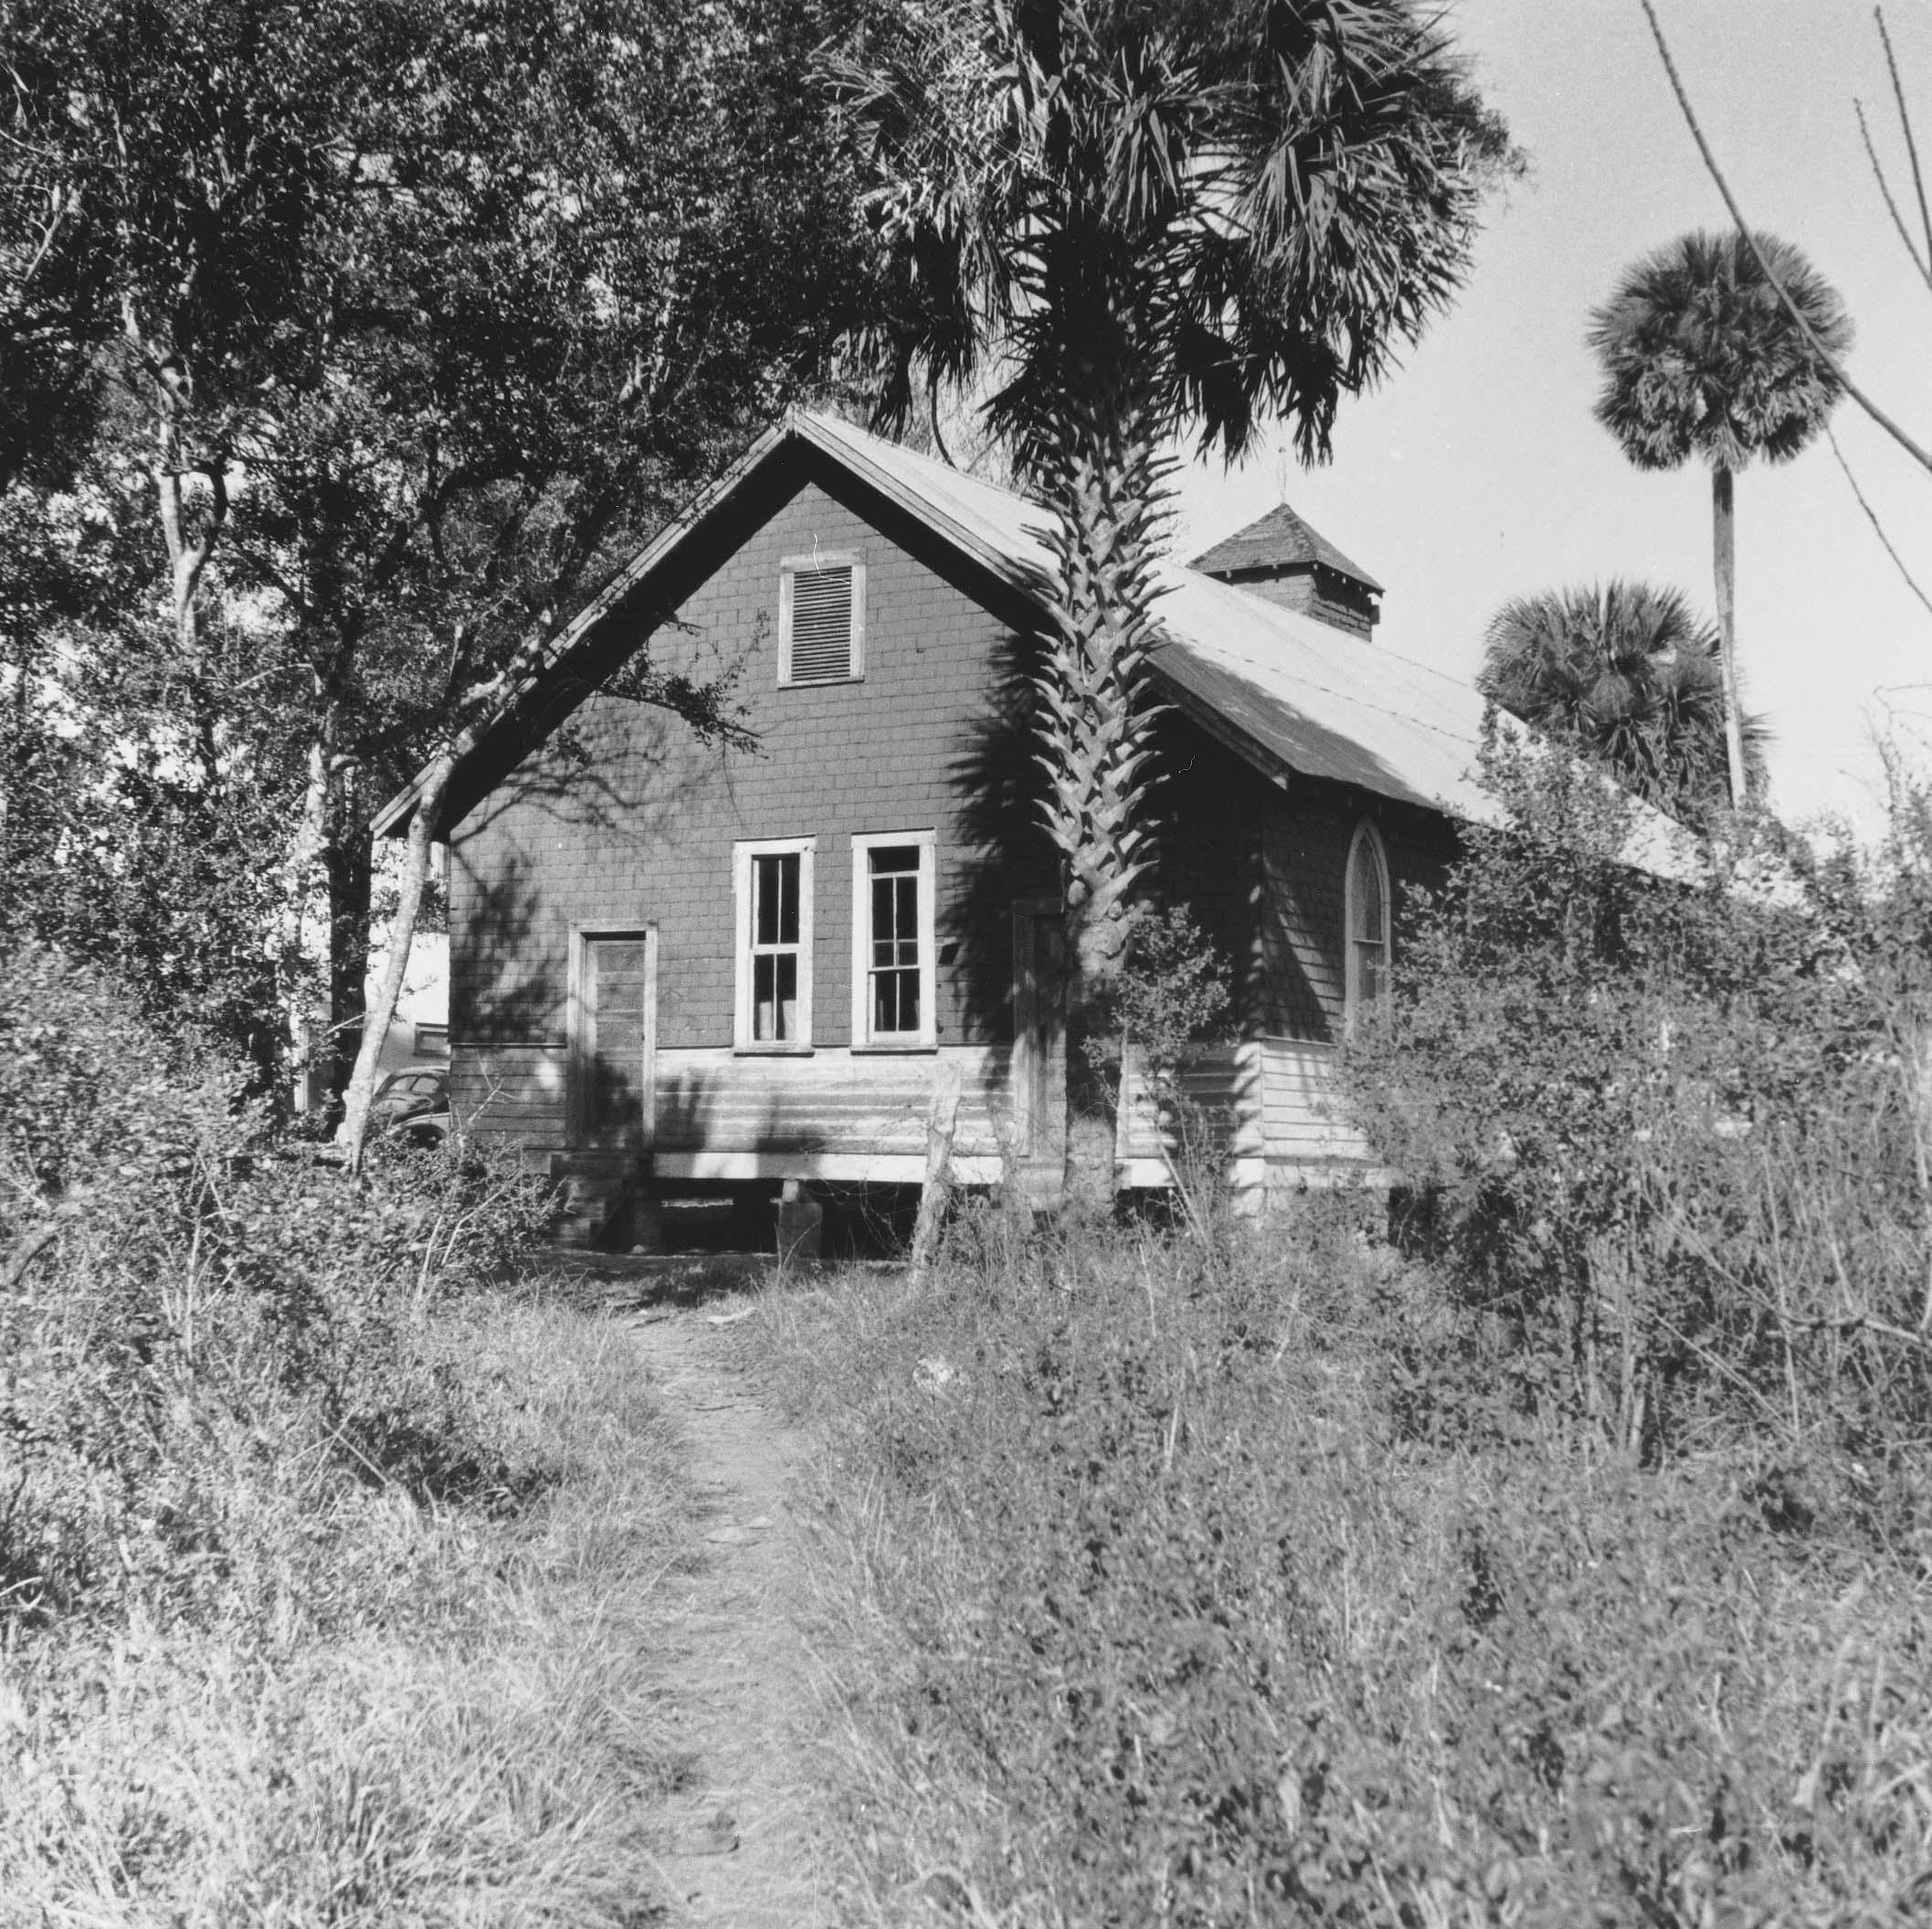 A home in Daytona Beach's Midtown community pictured in 1943 shows how much more natural vegetation remained in the neighborhood at that time. Many homes disappeared in the 1960s when they were taken down by the federal government's urban renewal program.